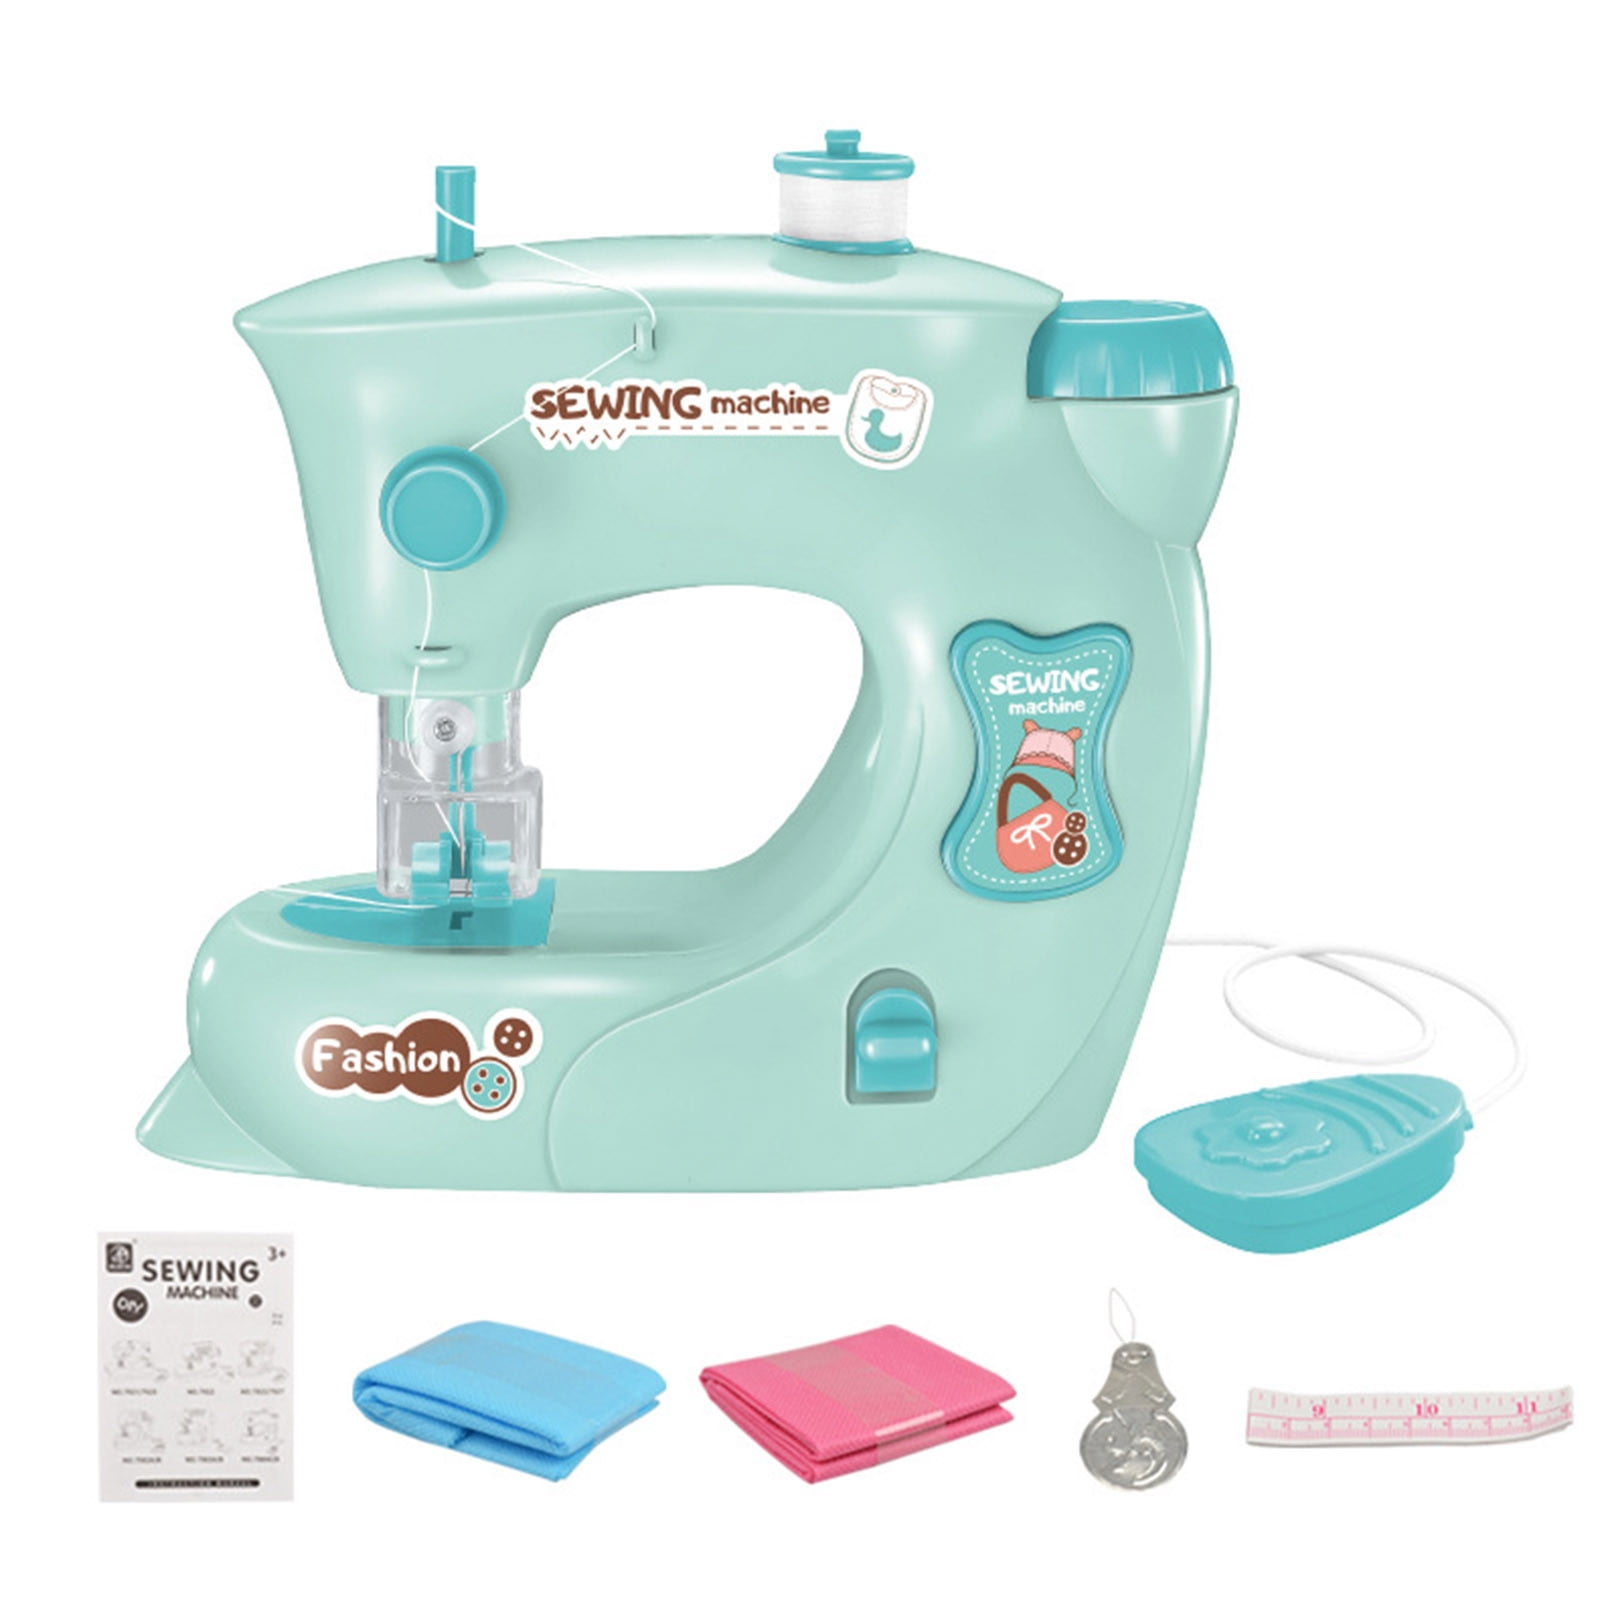 Gallickan Mini Sewing Machine - Educational Electric Kids Sewing Kit - Diy  Interesting for Kids over 4 Years Old Boys and Girls Birthday Gifts - on  Clearance! 